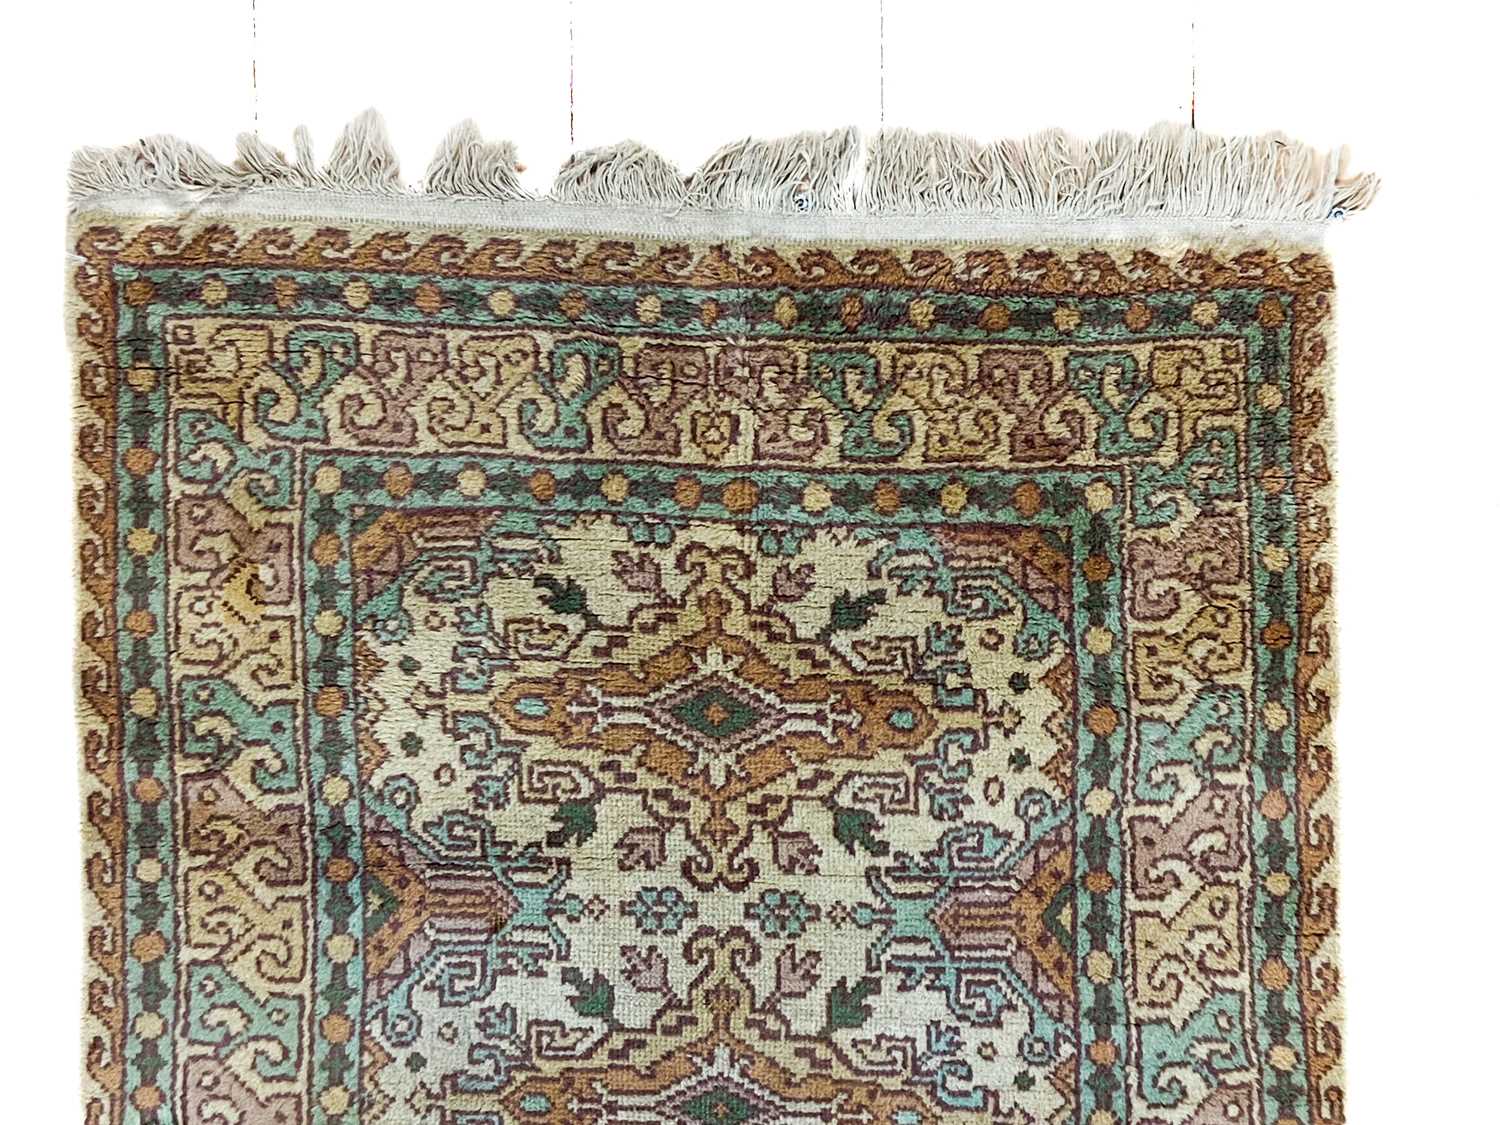 A Turkish rug, early 20th century. - Image 2 of 3